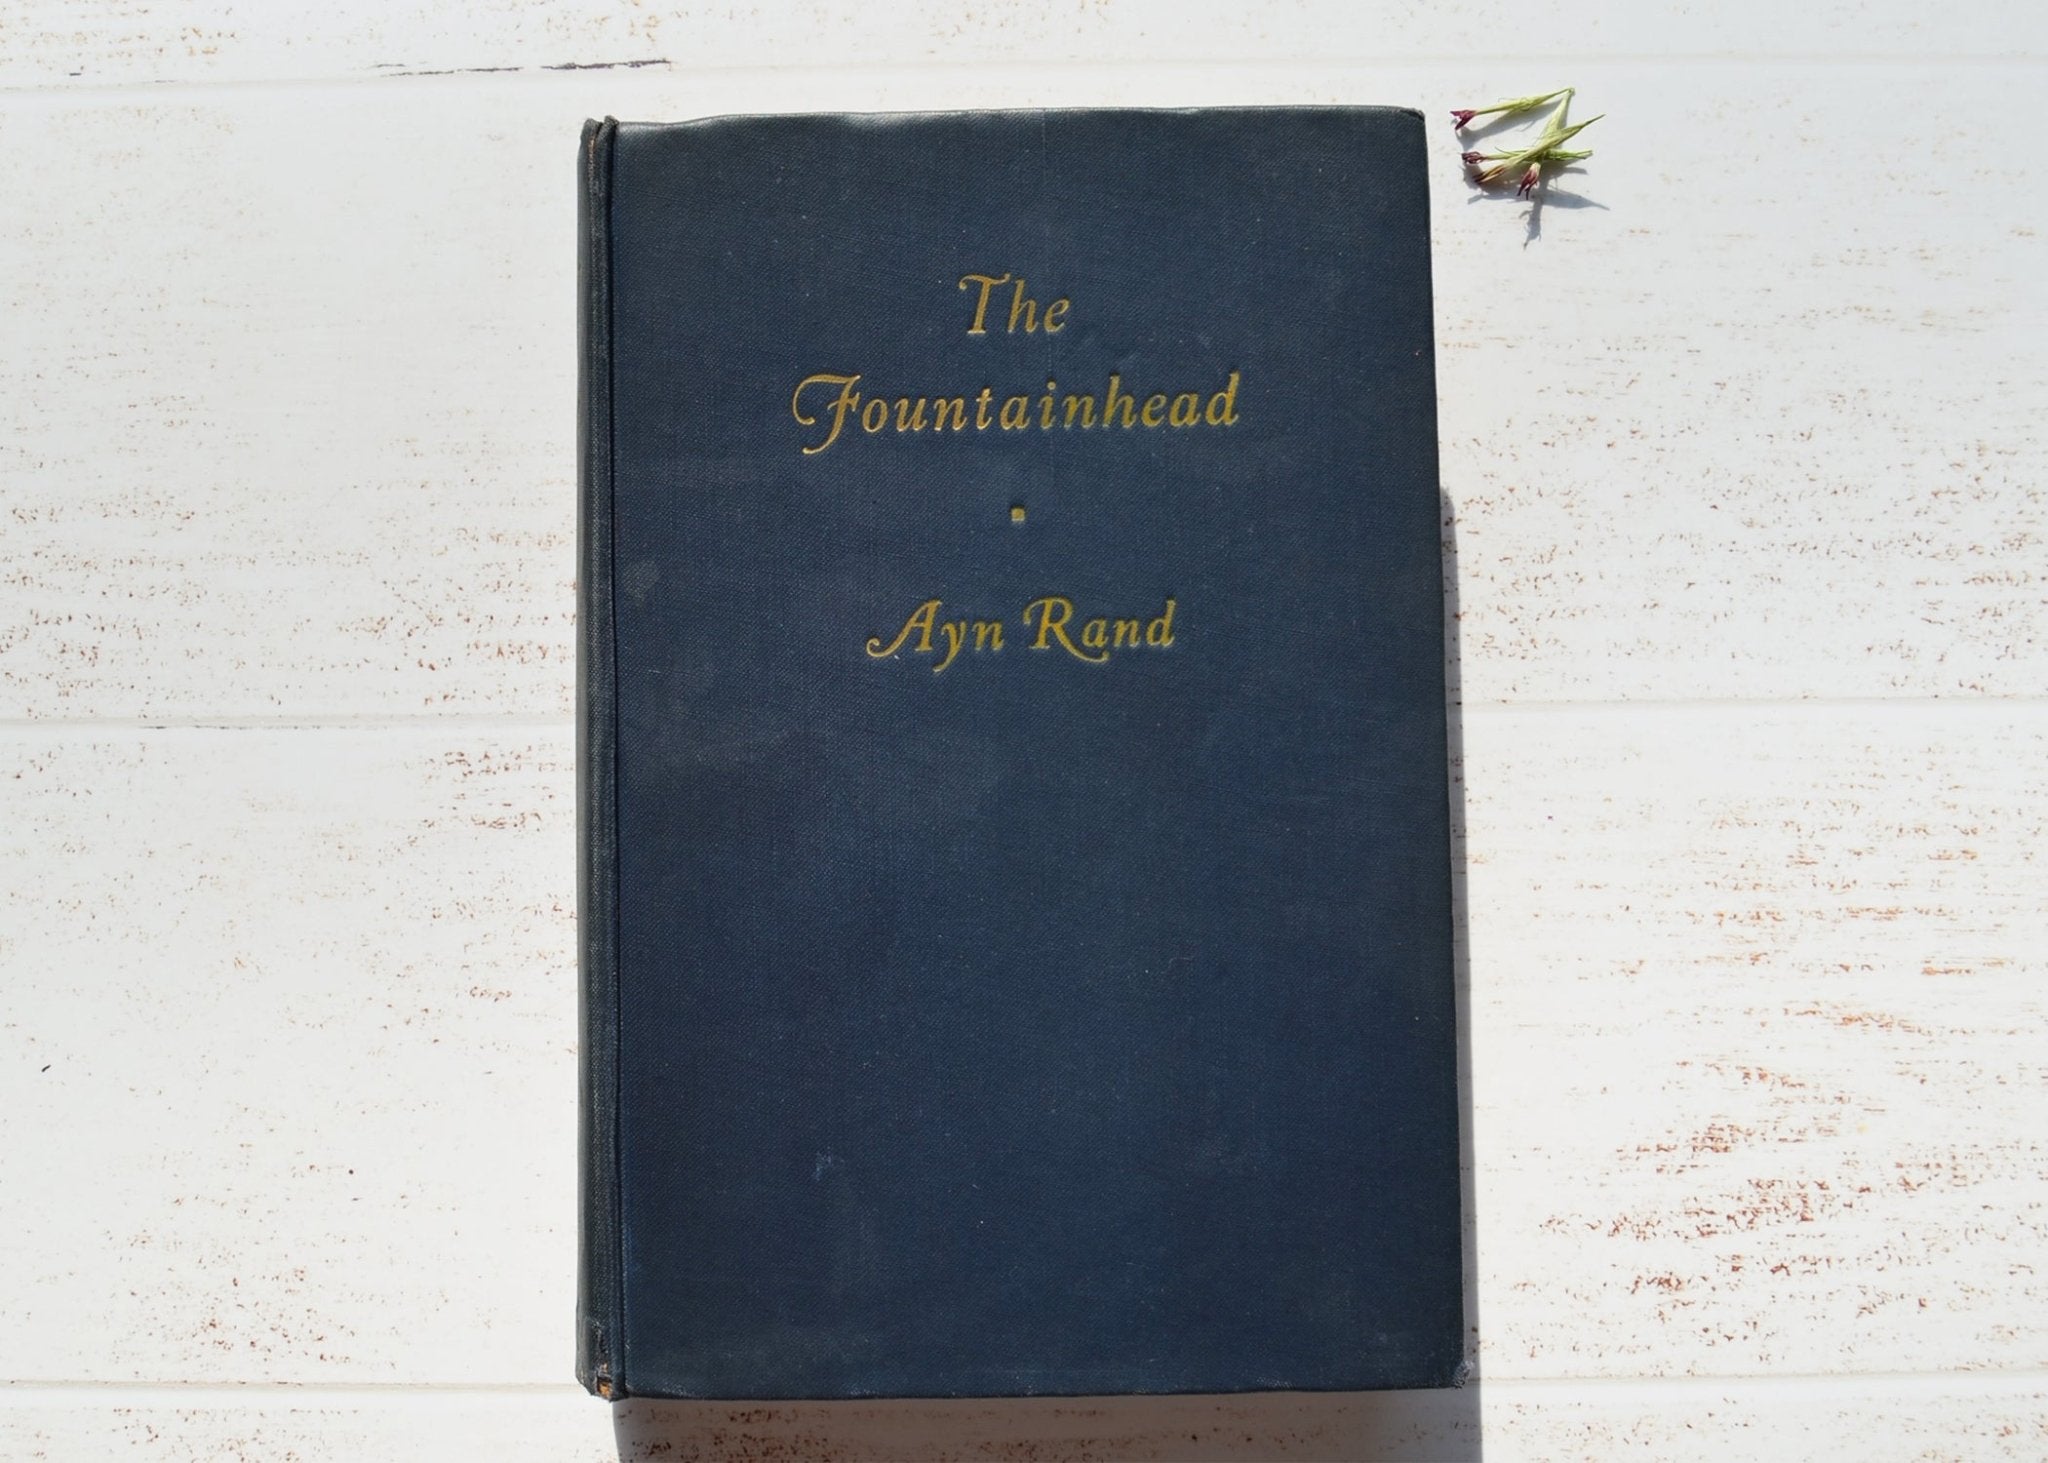 Sixth Printing – The Fountainhead by Ayn Rand 1943 - Brookfield Books